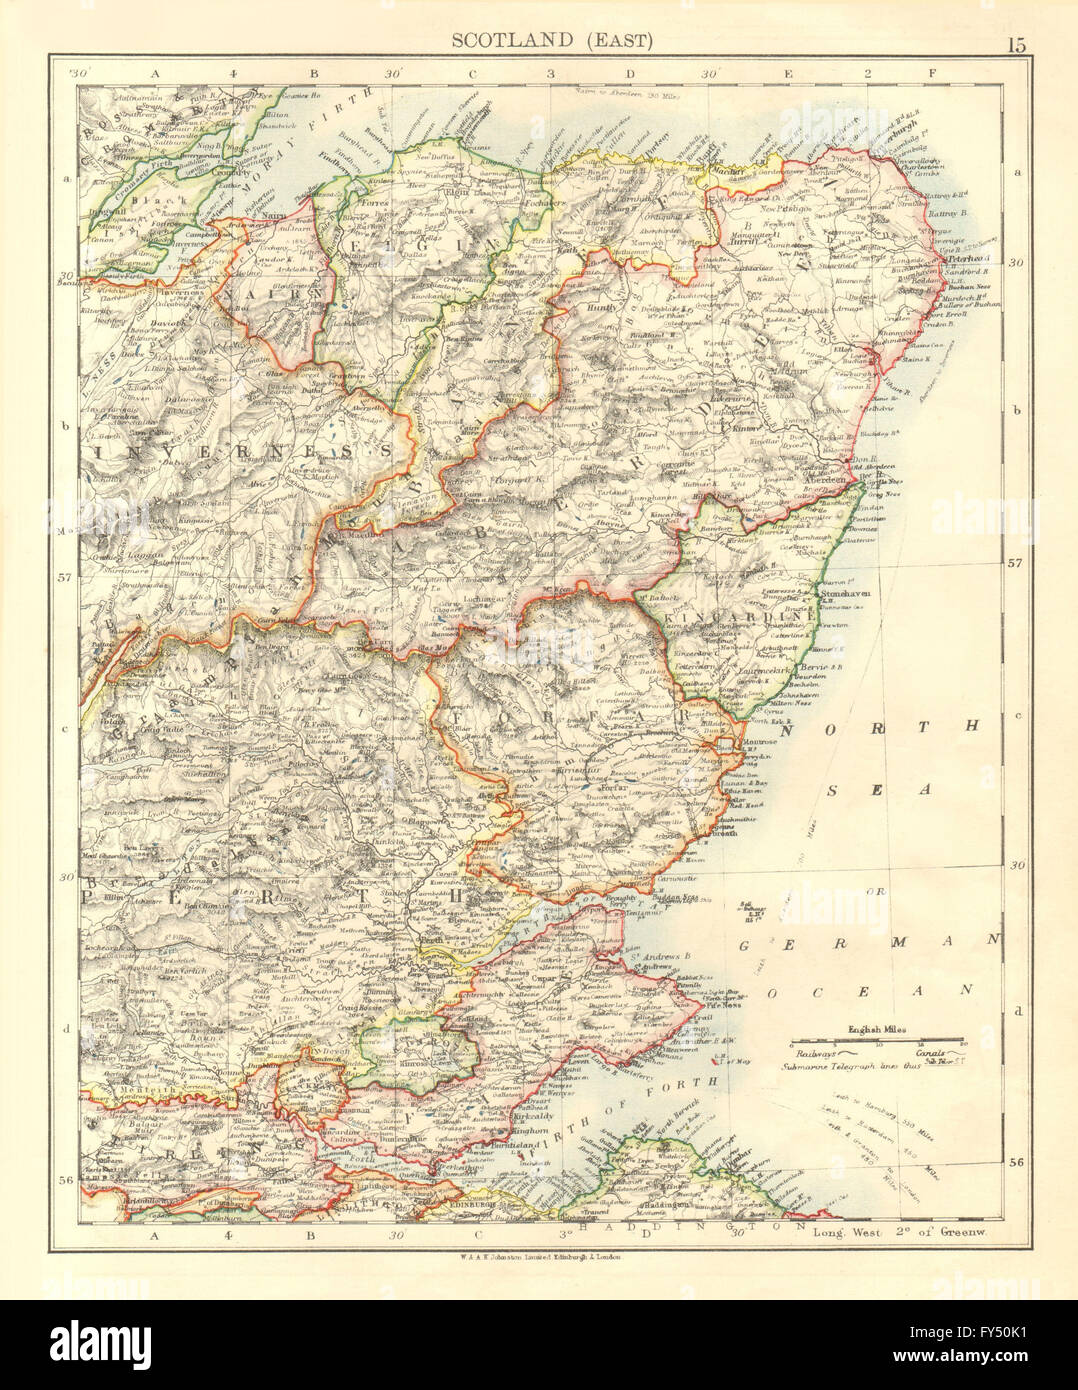 SCOTLAND EAST. Grampian Tayside Fife Firth of Forth Aberdeen. JOHNSTON, 1906 map Stock Photo